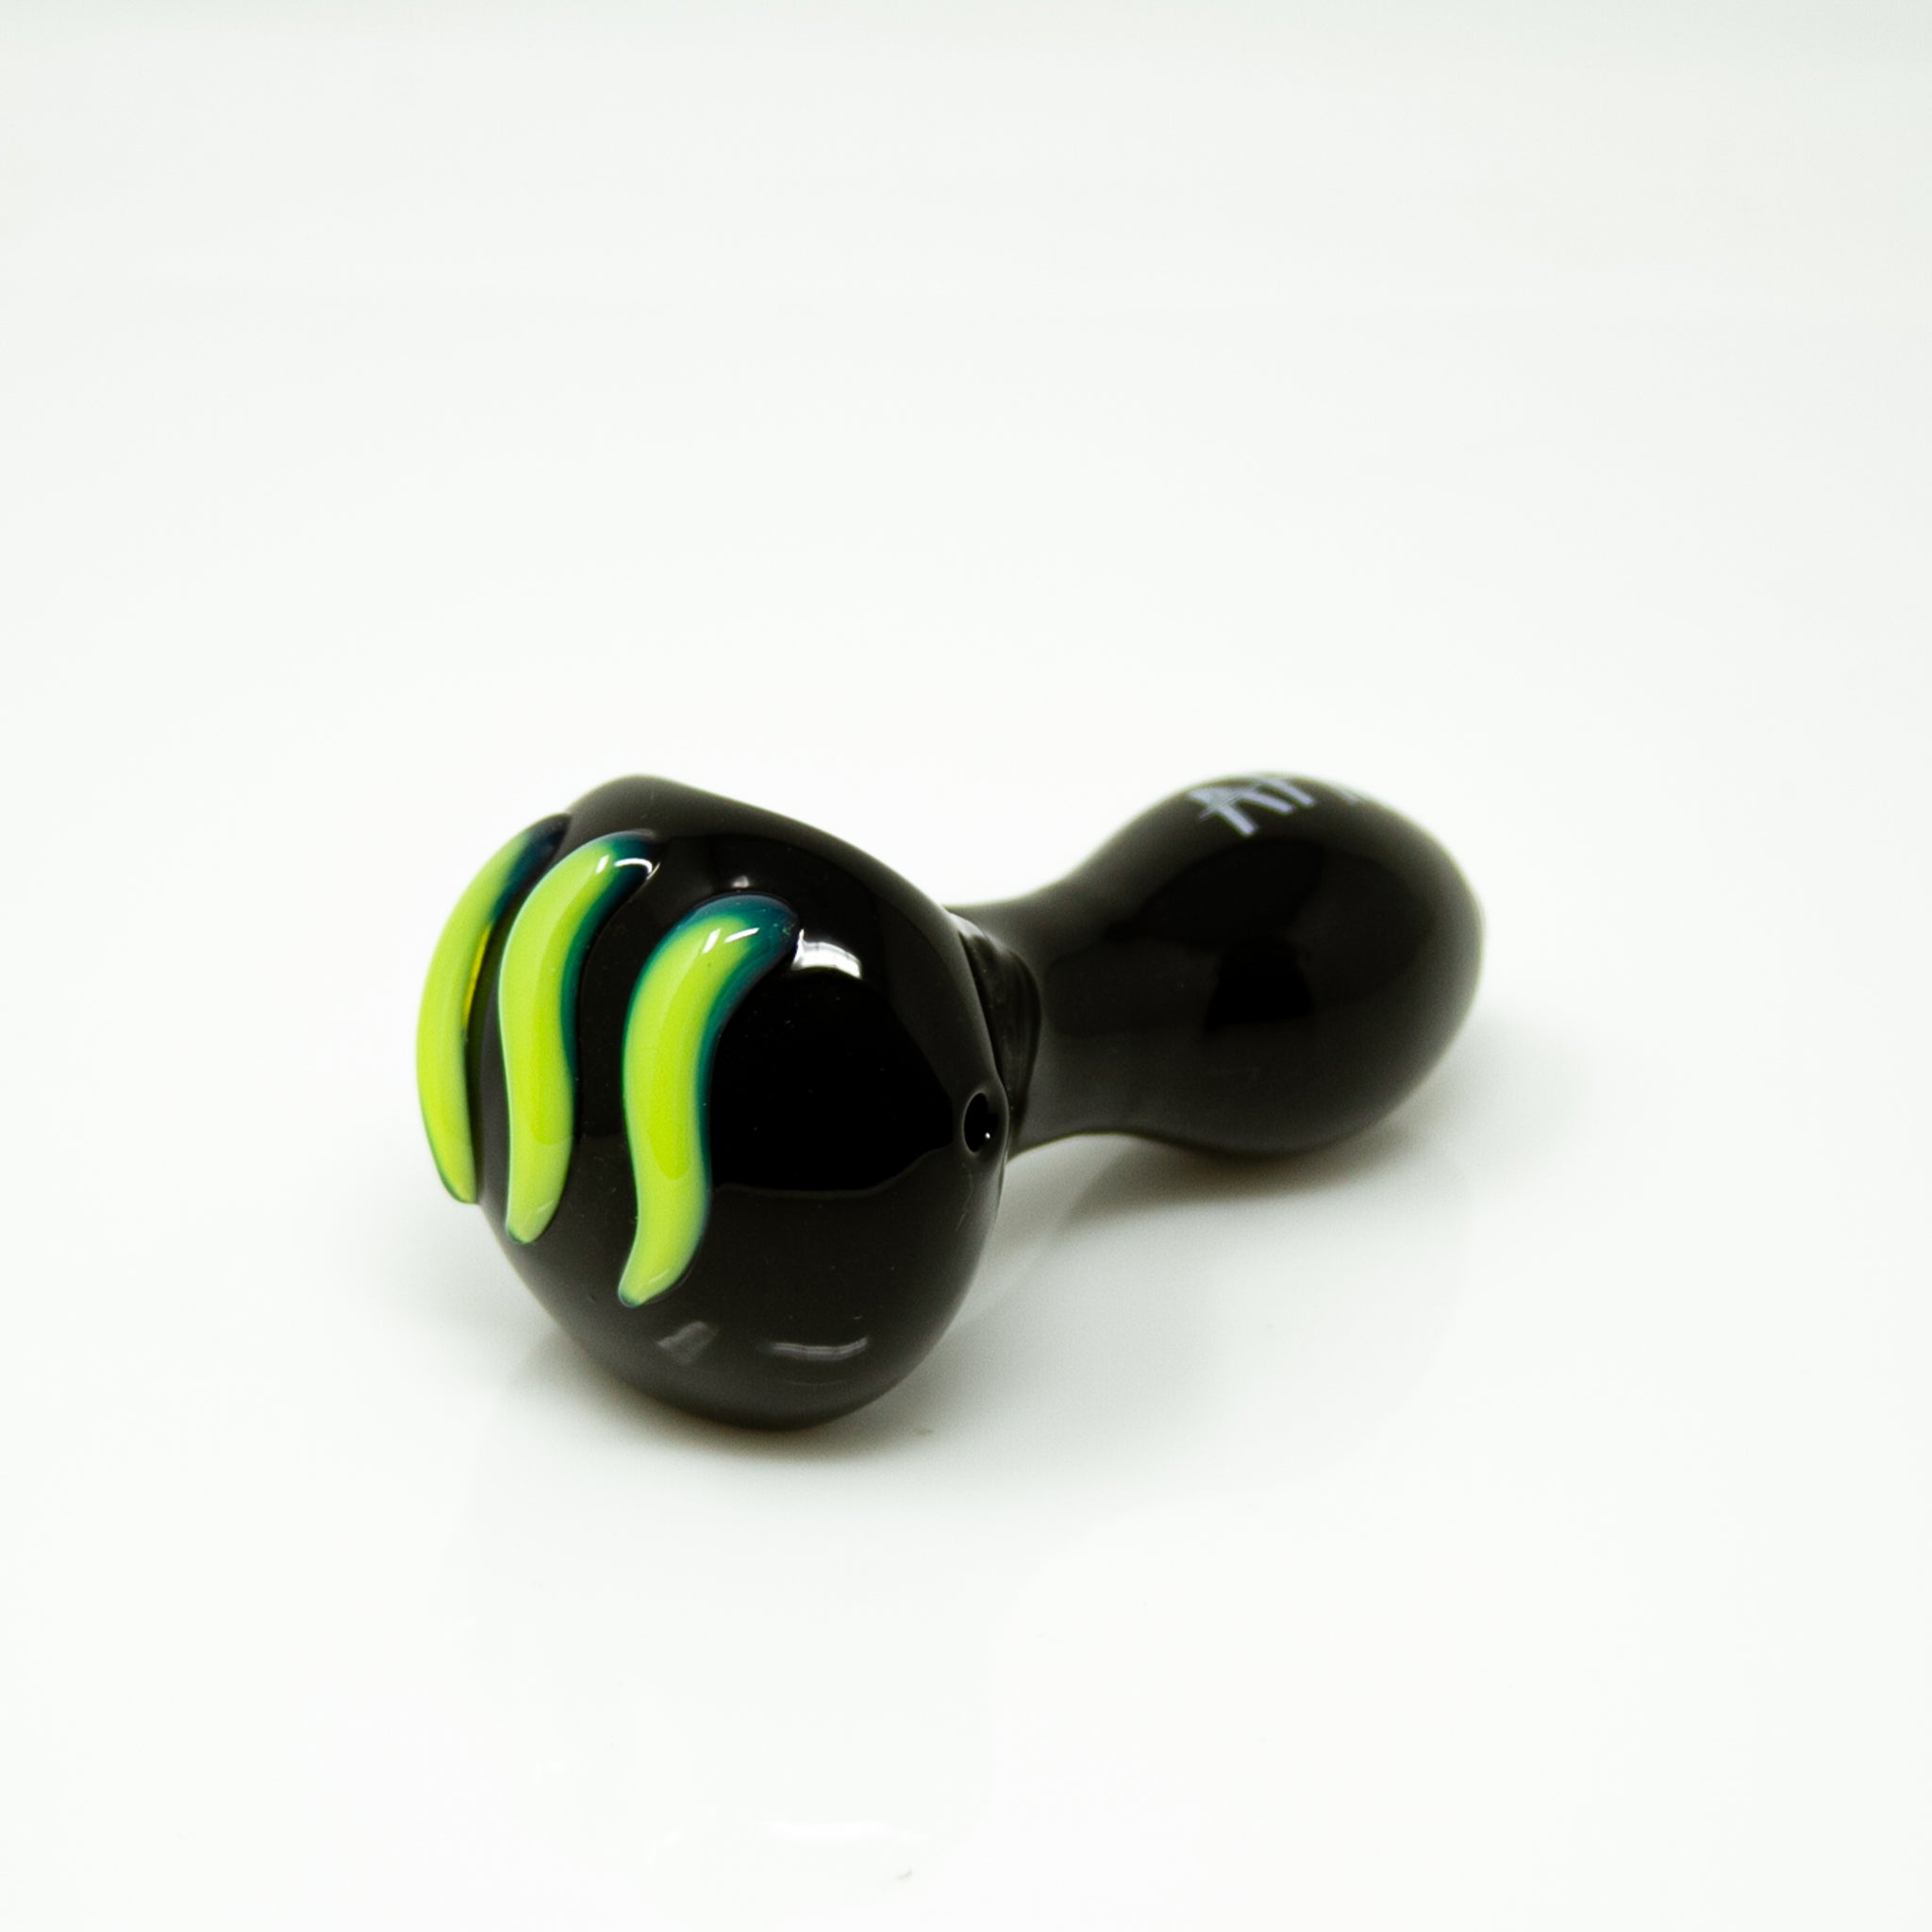 The Tiger Claw Pipe